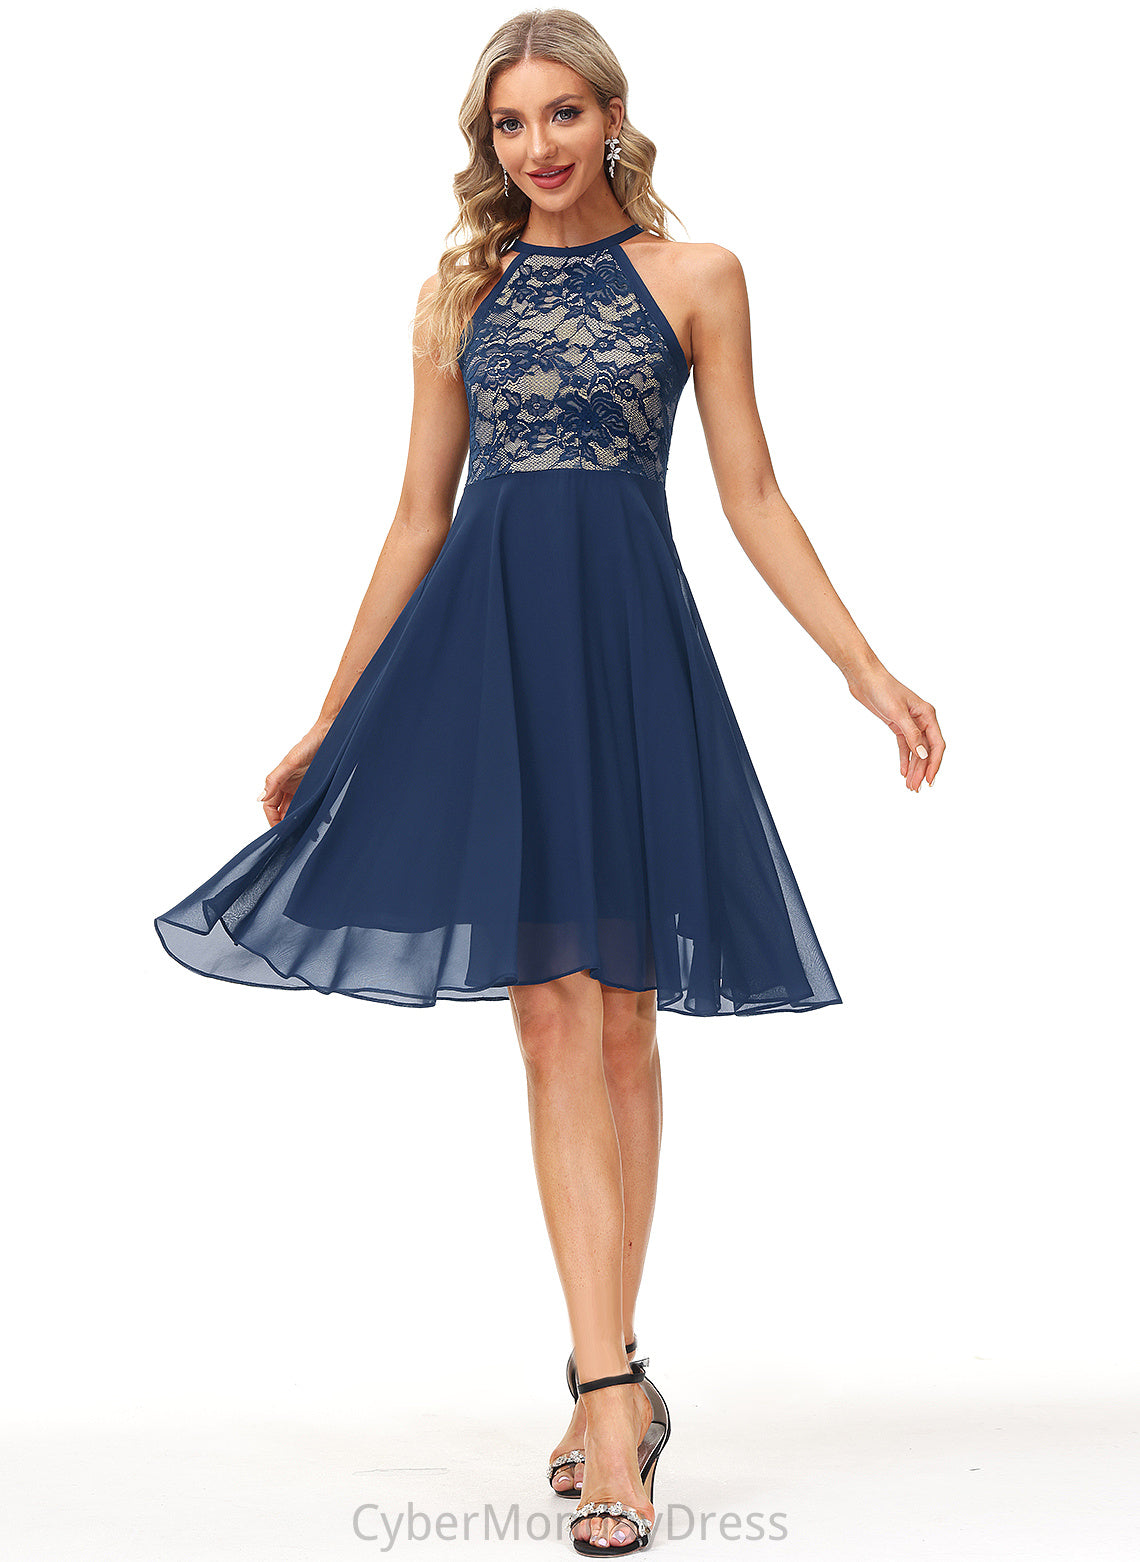 Lace Knee-Length Cocktail Dresses Ruth Scoop With Neck Chiffon Dress A-Line Cocktail